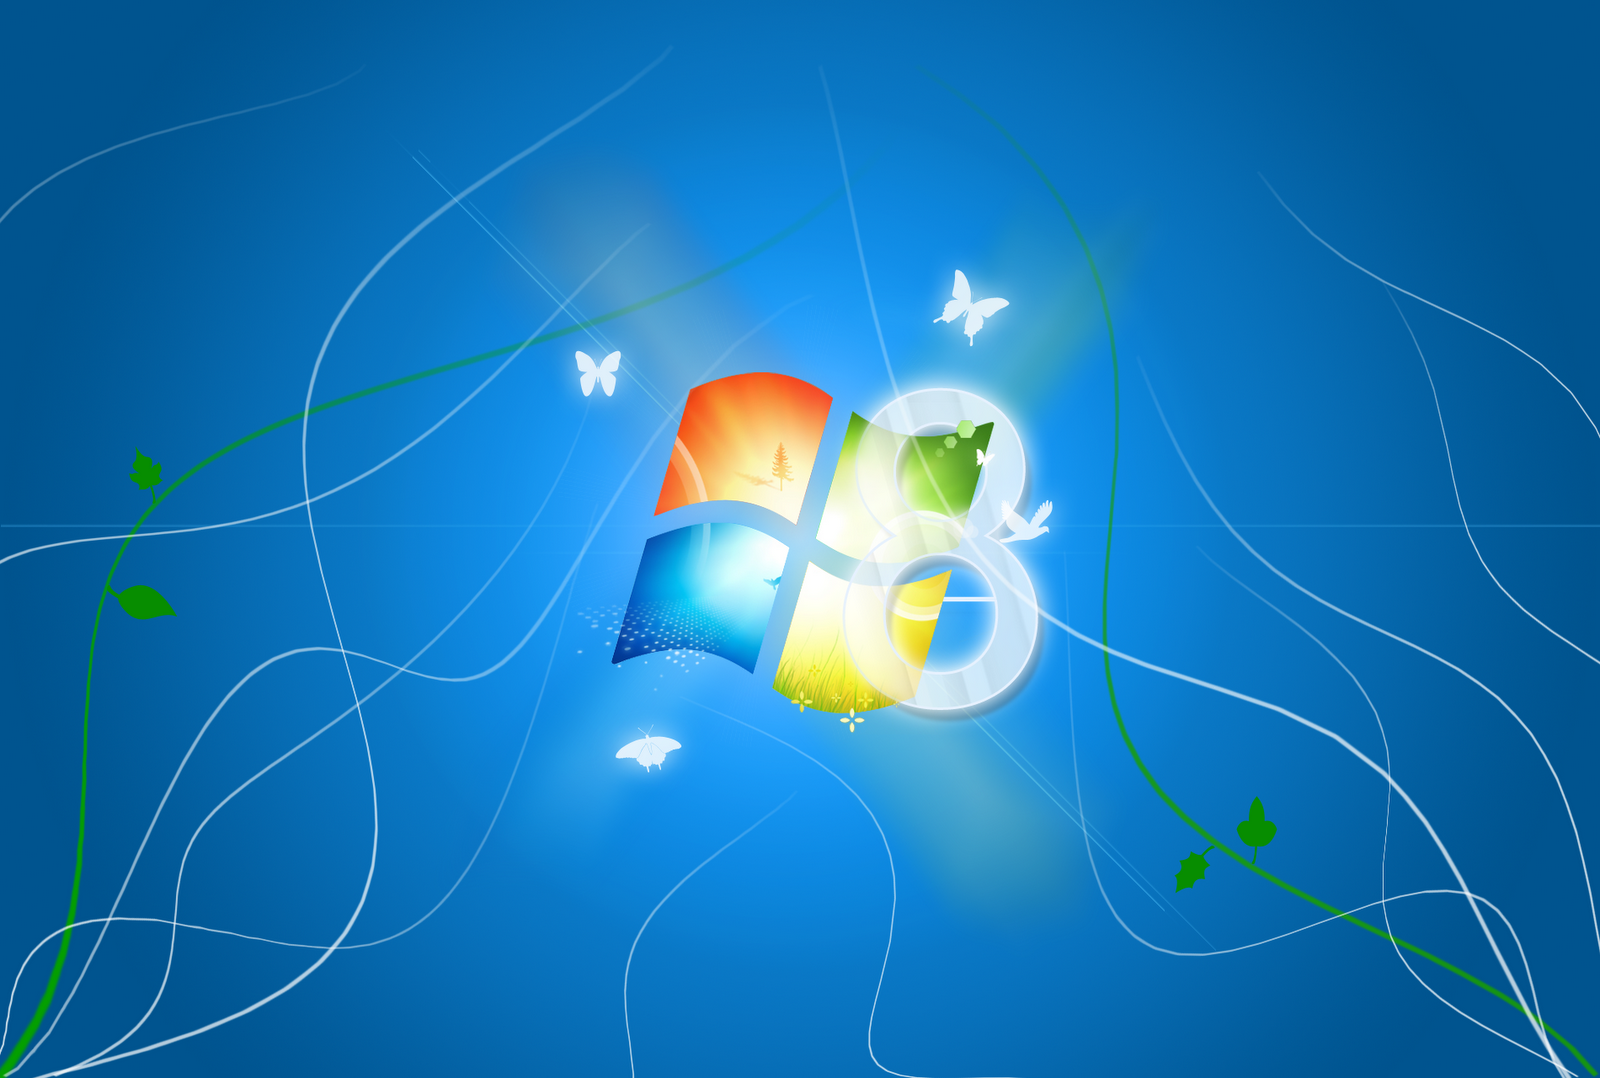 Windows_8_Wallpapers-1.png